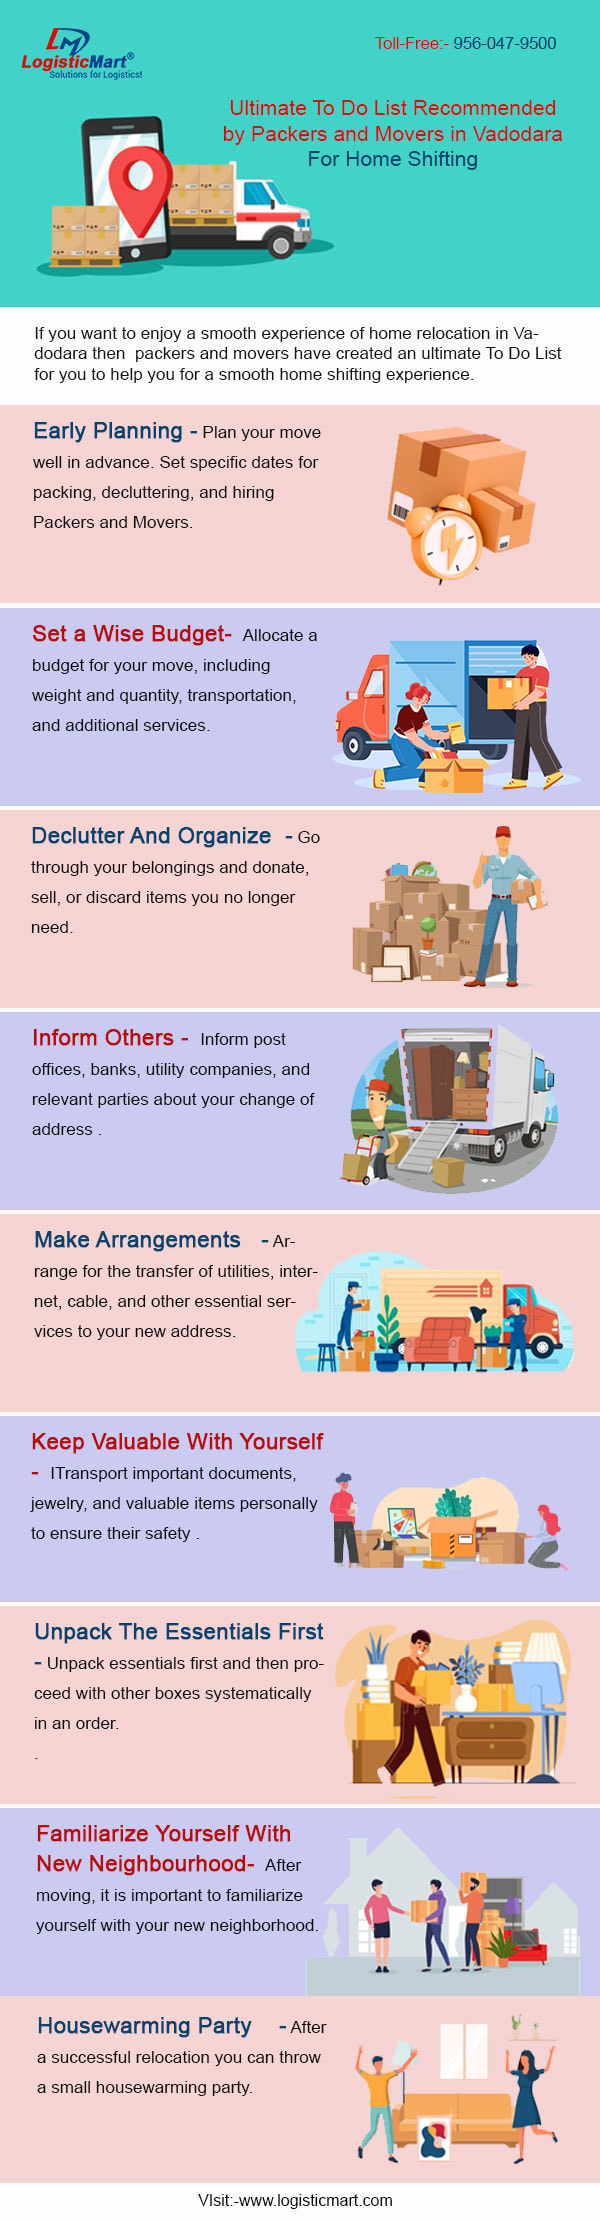 Packers and Movers in Vadodara rates - LogisticMart